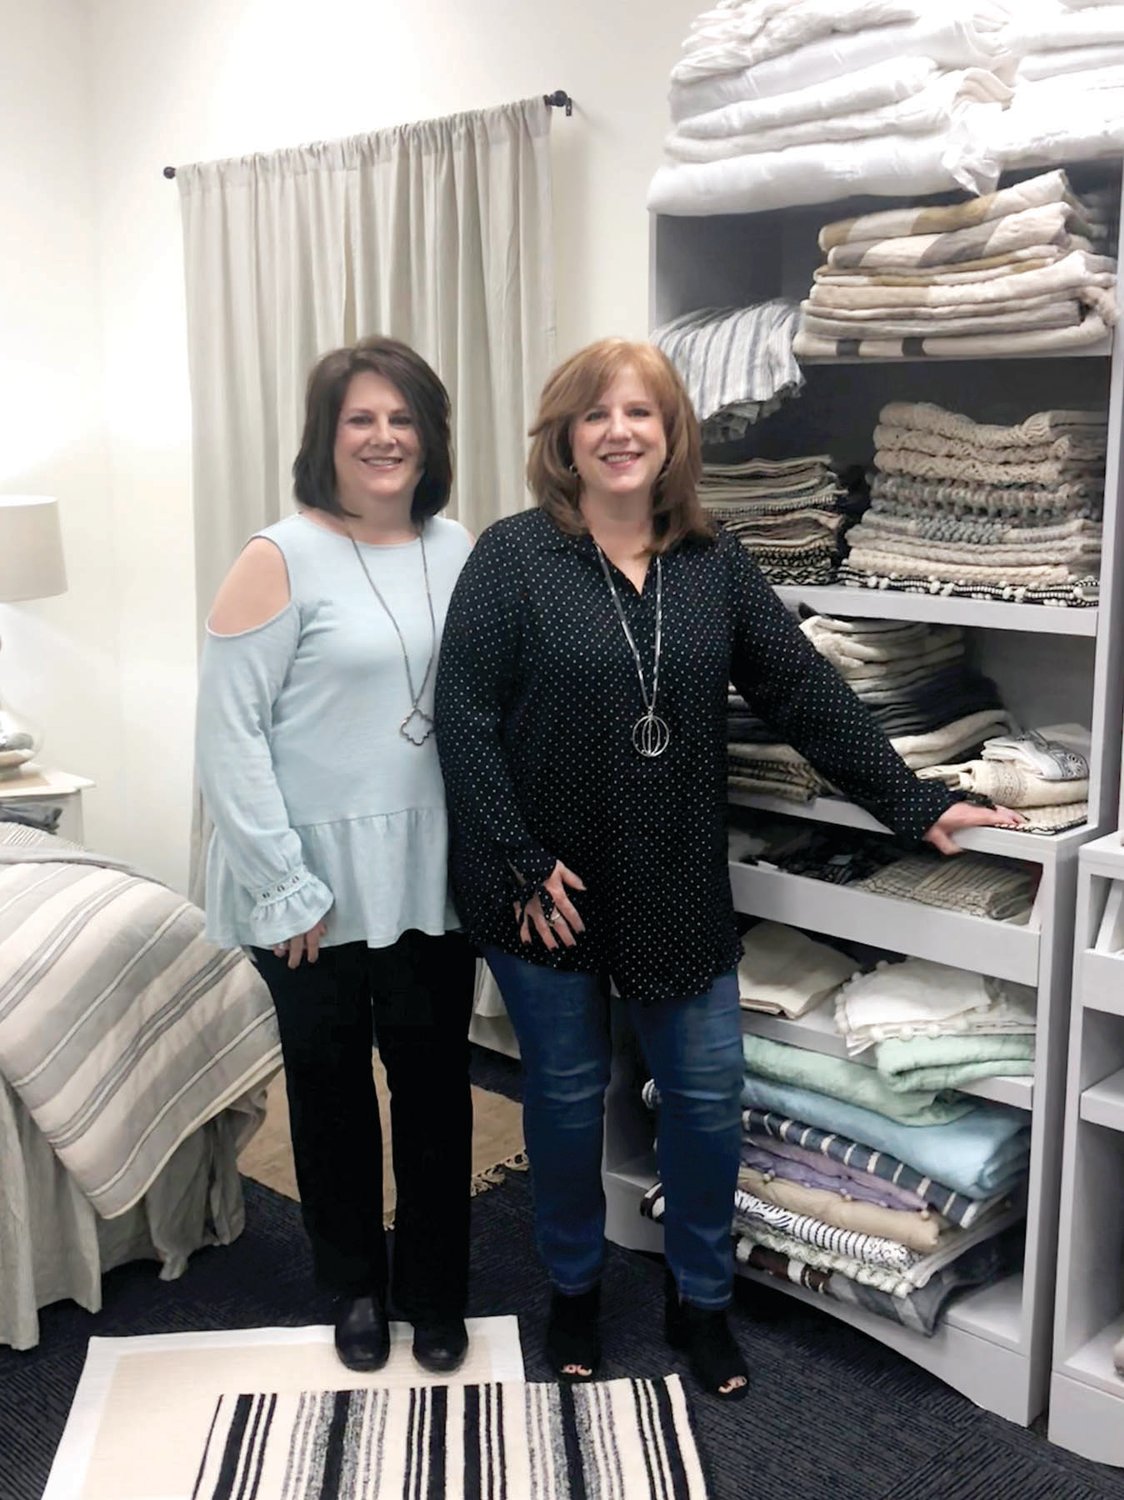 Sisters Brenda Jones, left, and Janine Bosh, both of Sellersville, are the designers of “Piper Originals,” original collections of curtains, bedding and home decor items from Piper Classics.